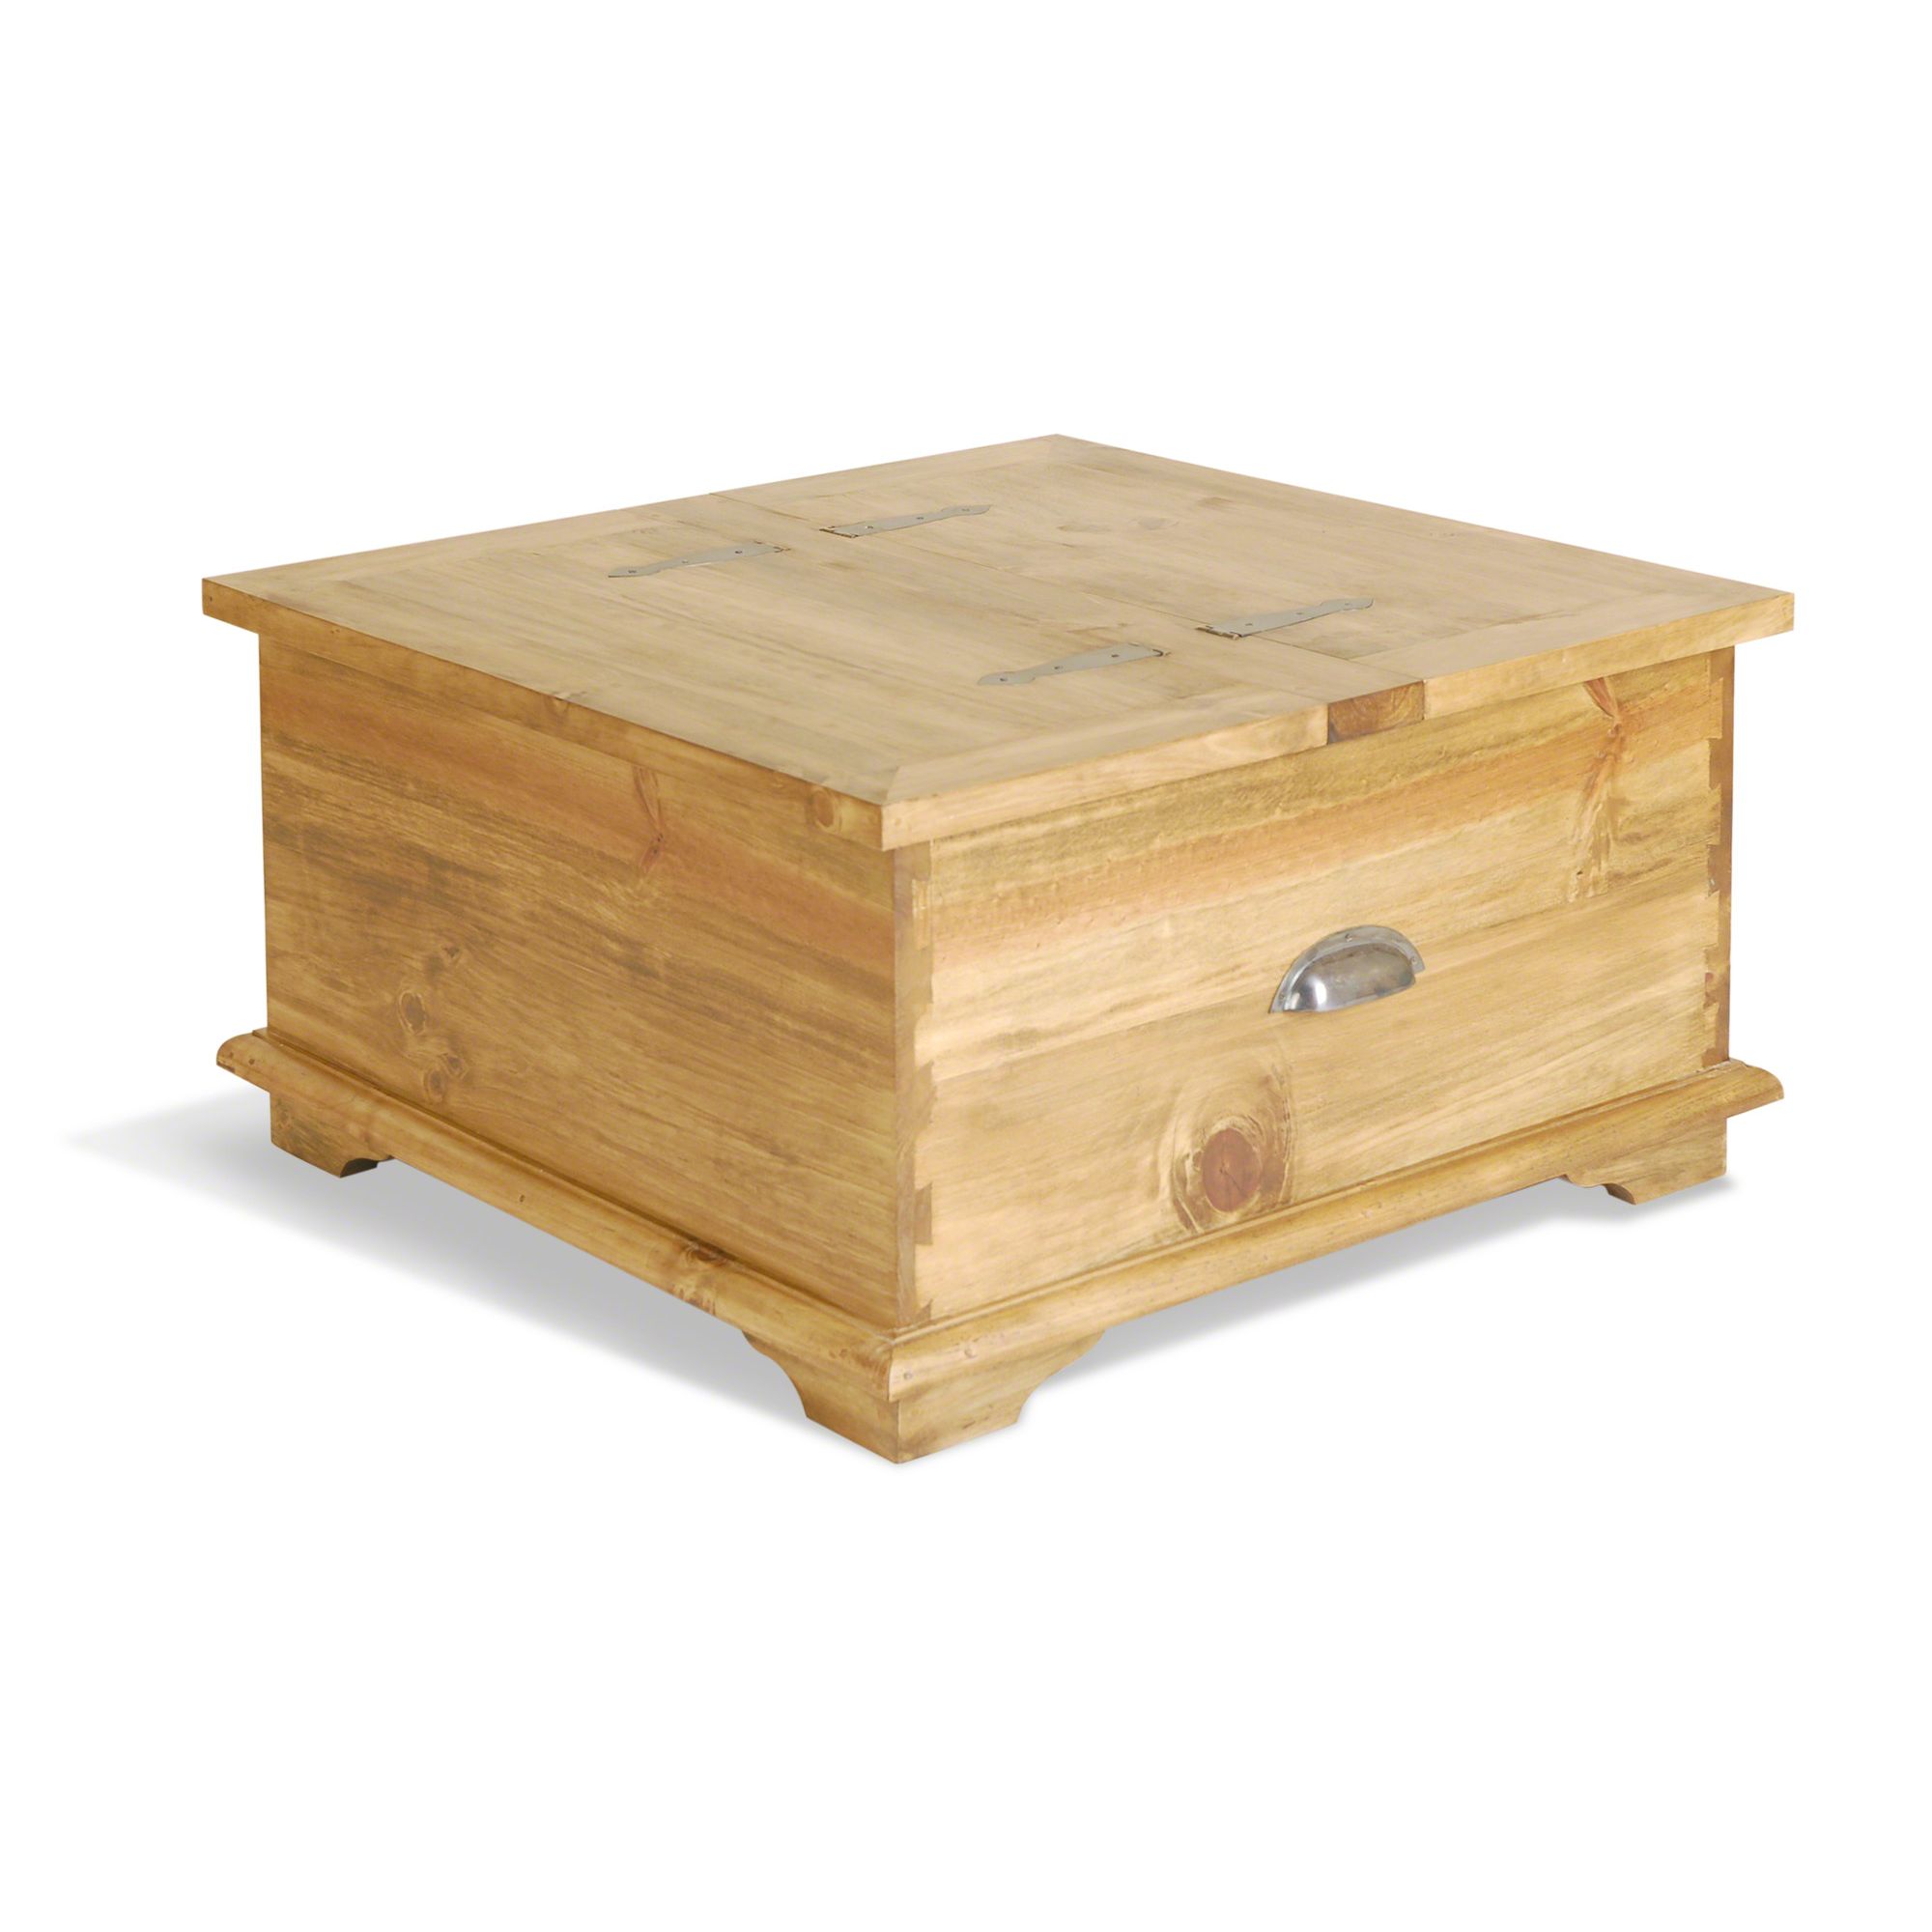 Oceans Apart Vintage Pine Square Trunk Coffee Table at Tesco Direct